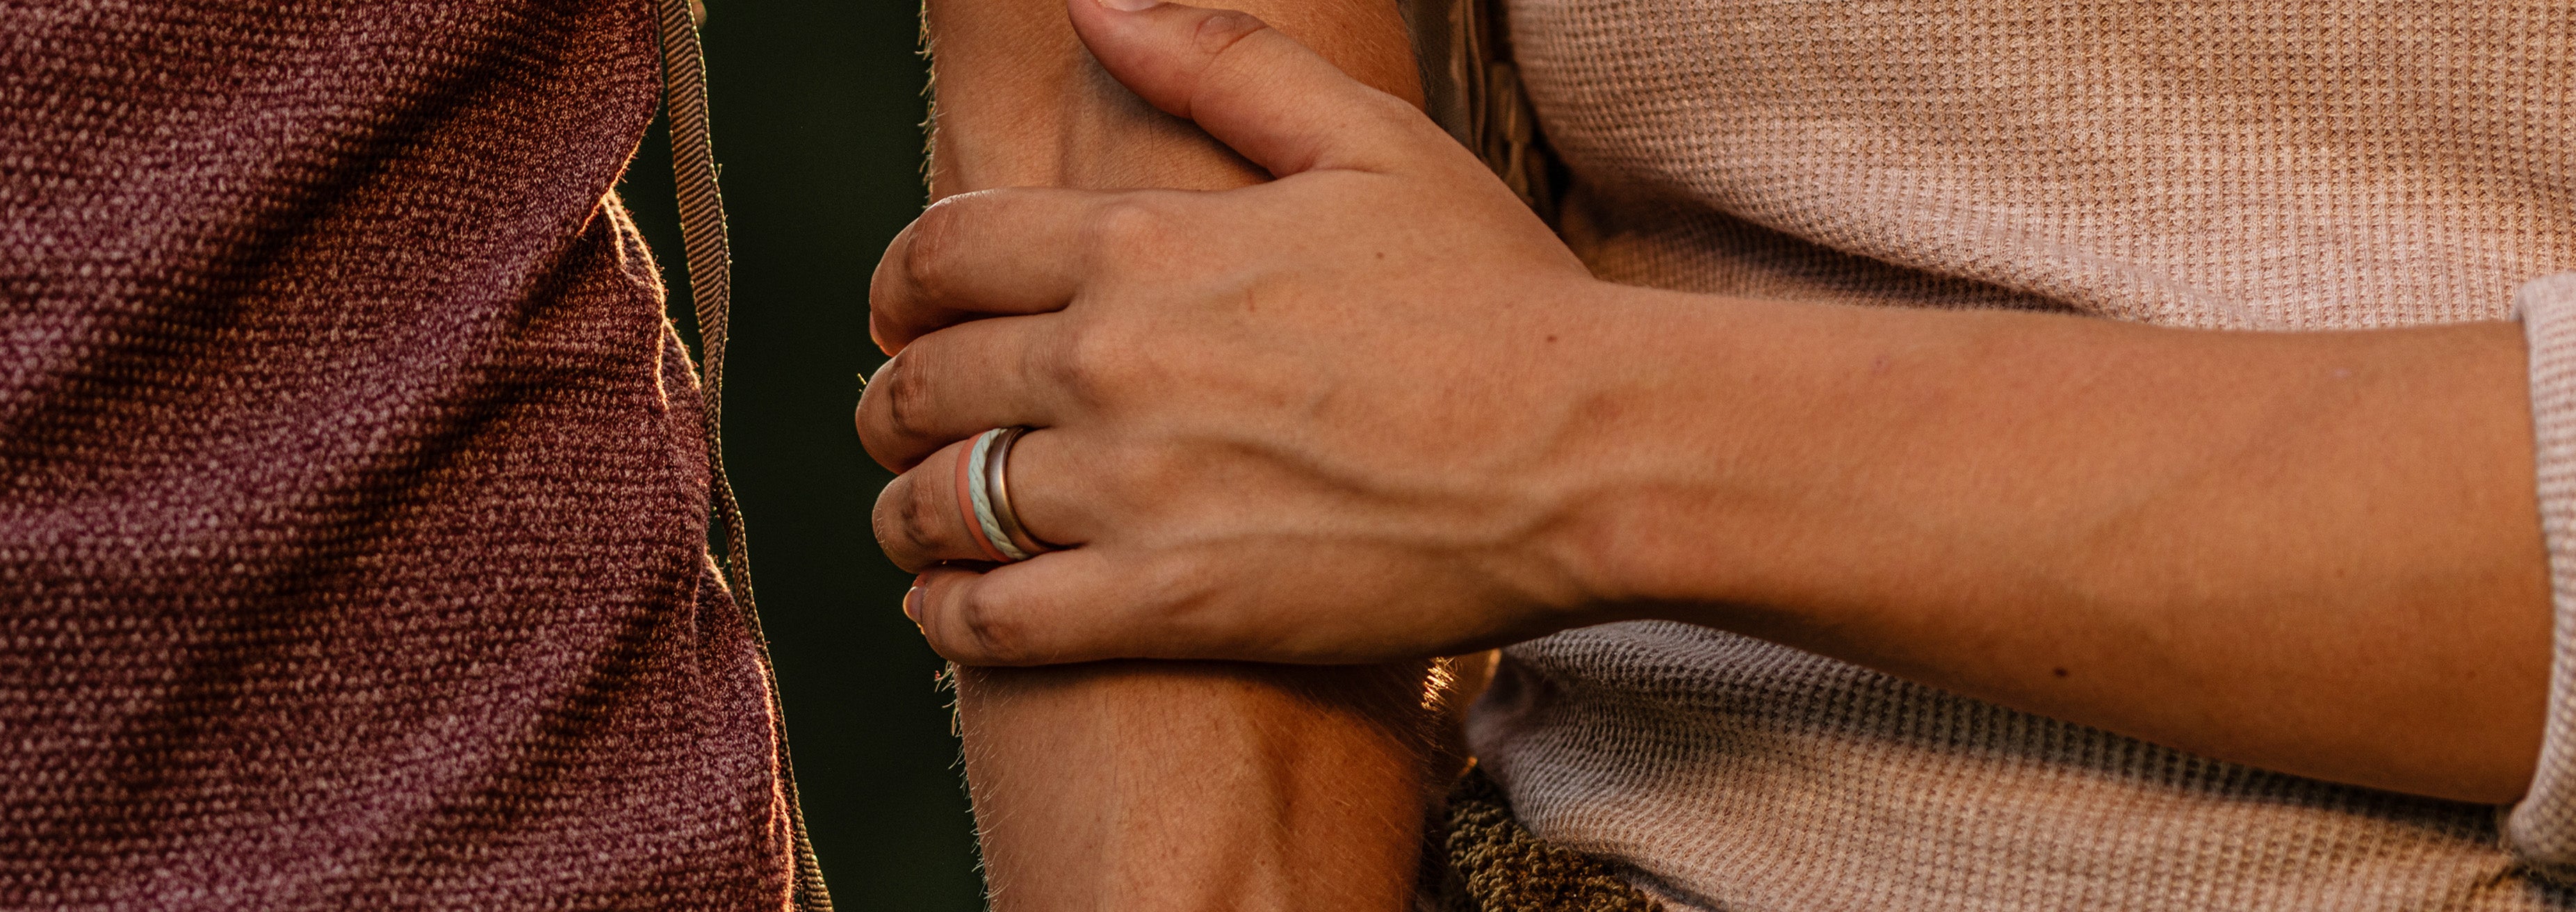 Boardwalk - Stackable Ring lifestyle image 3